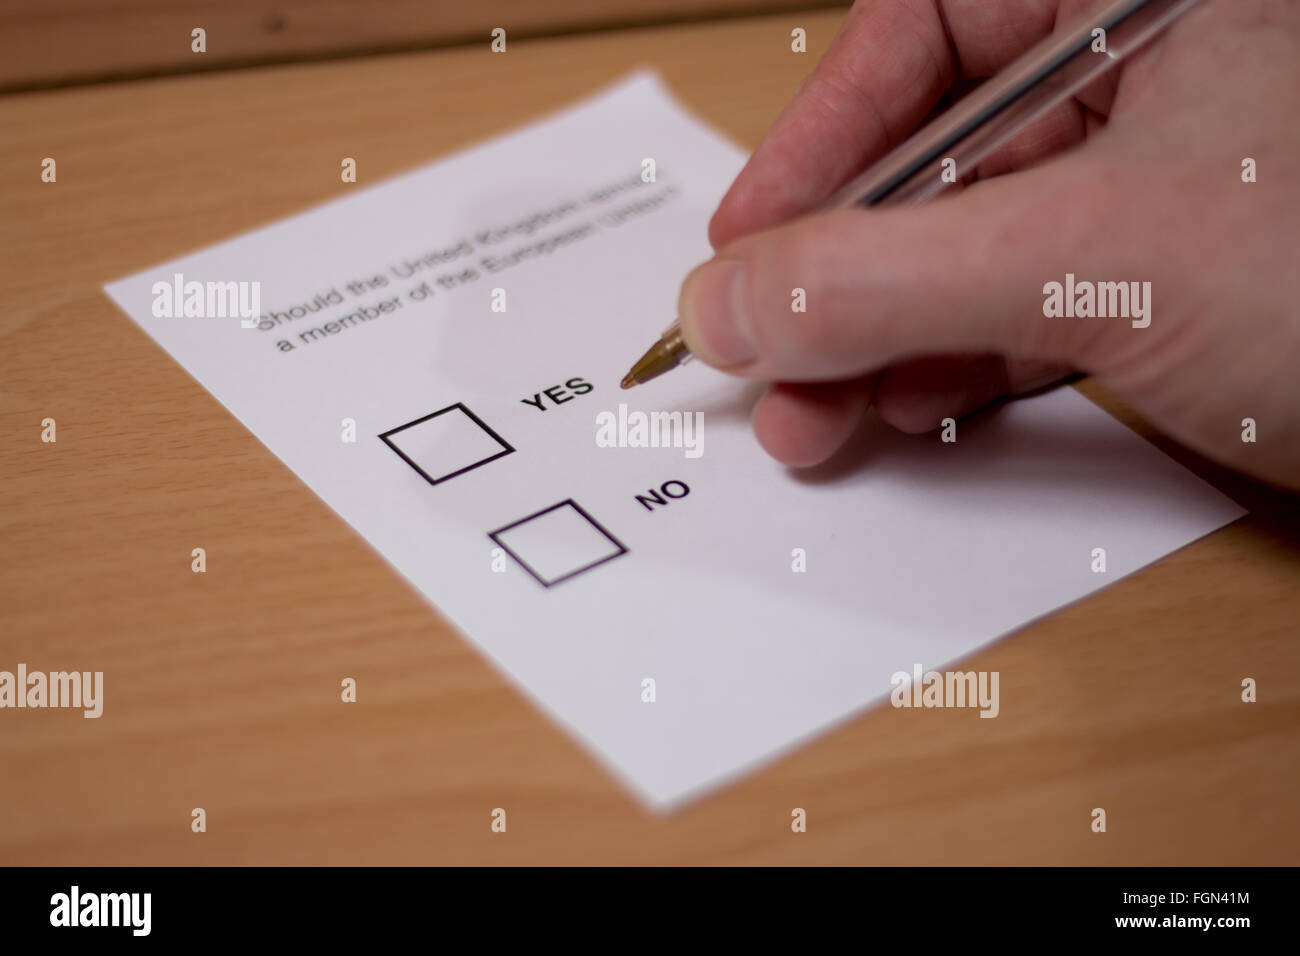 Someone choosing between YES or NO options on a voting ballot. Stock Photo